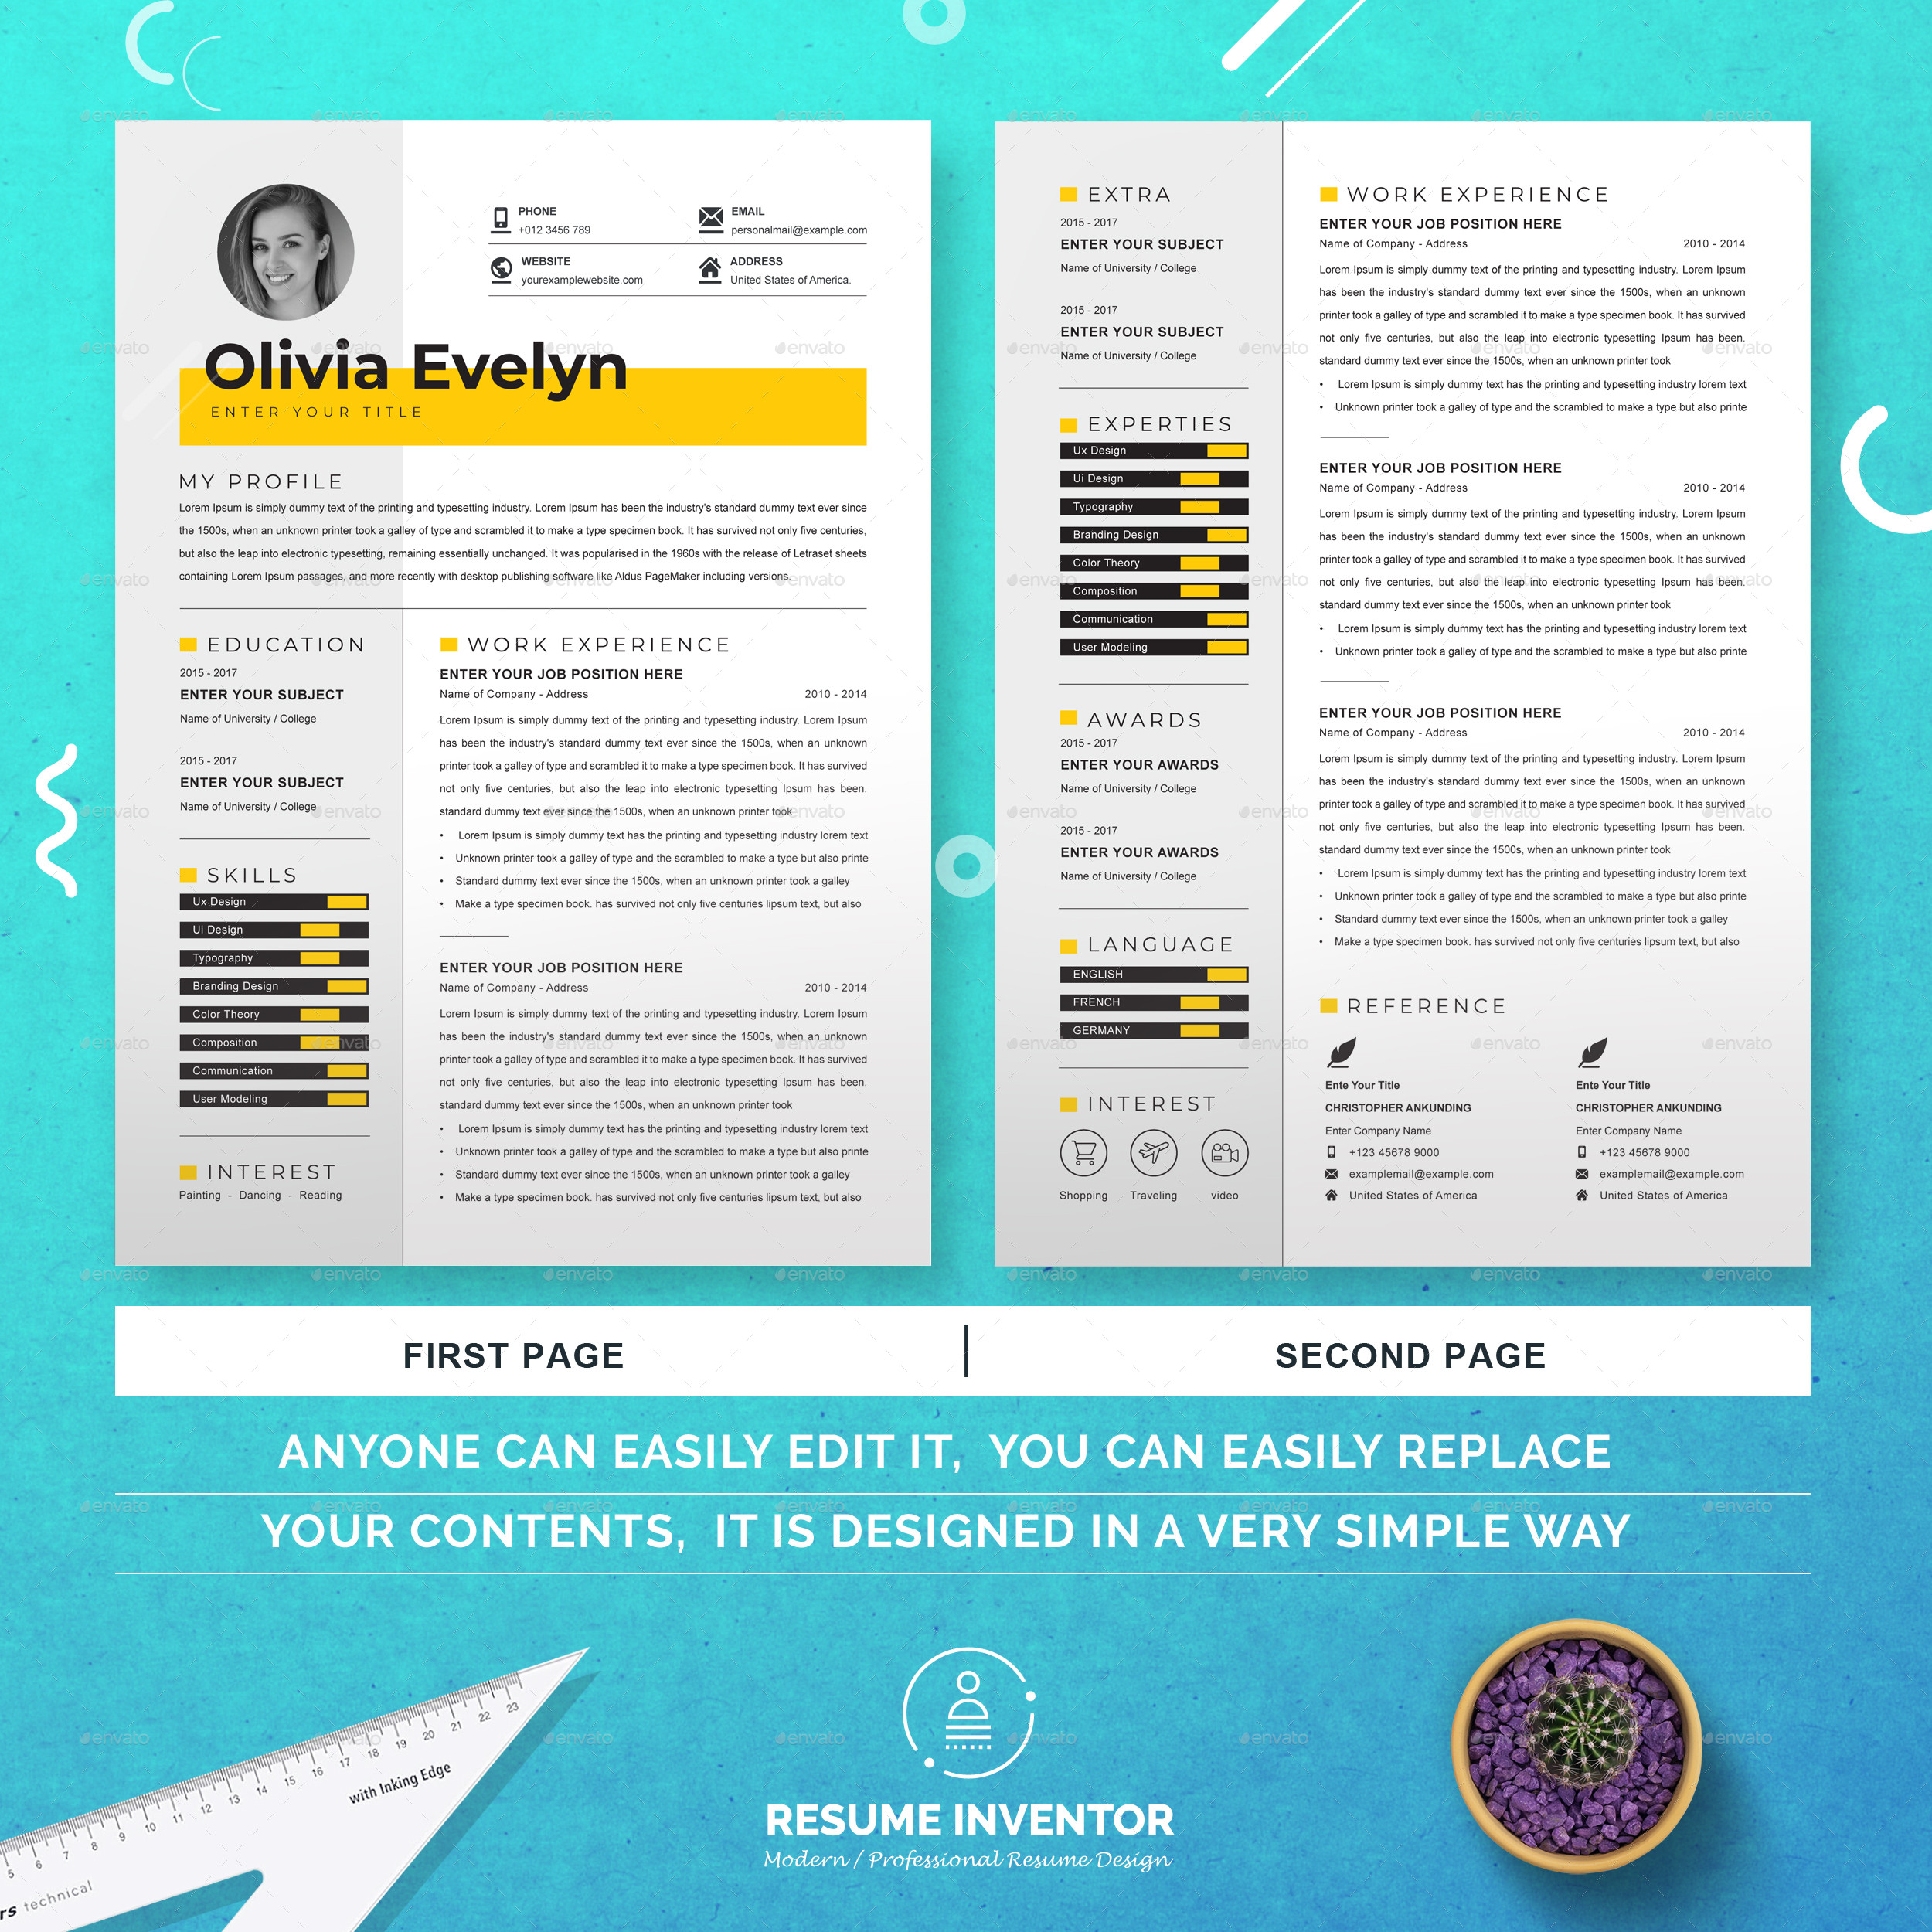 Sample 2023 Resume for Accounts Payable Resume Template / Professional Cv Template 2023 by Resumeinventor …